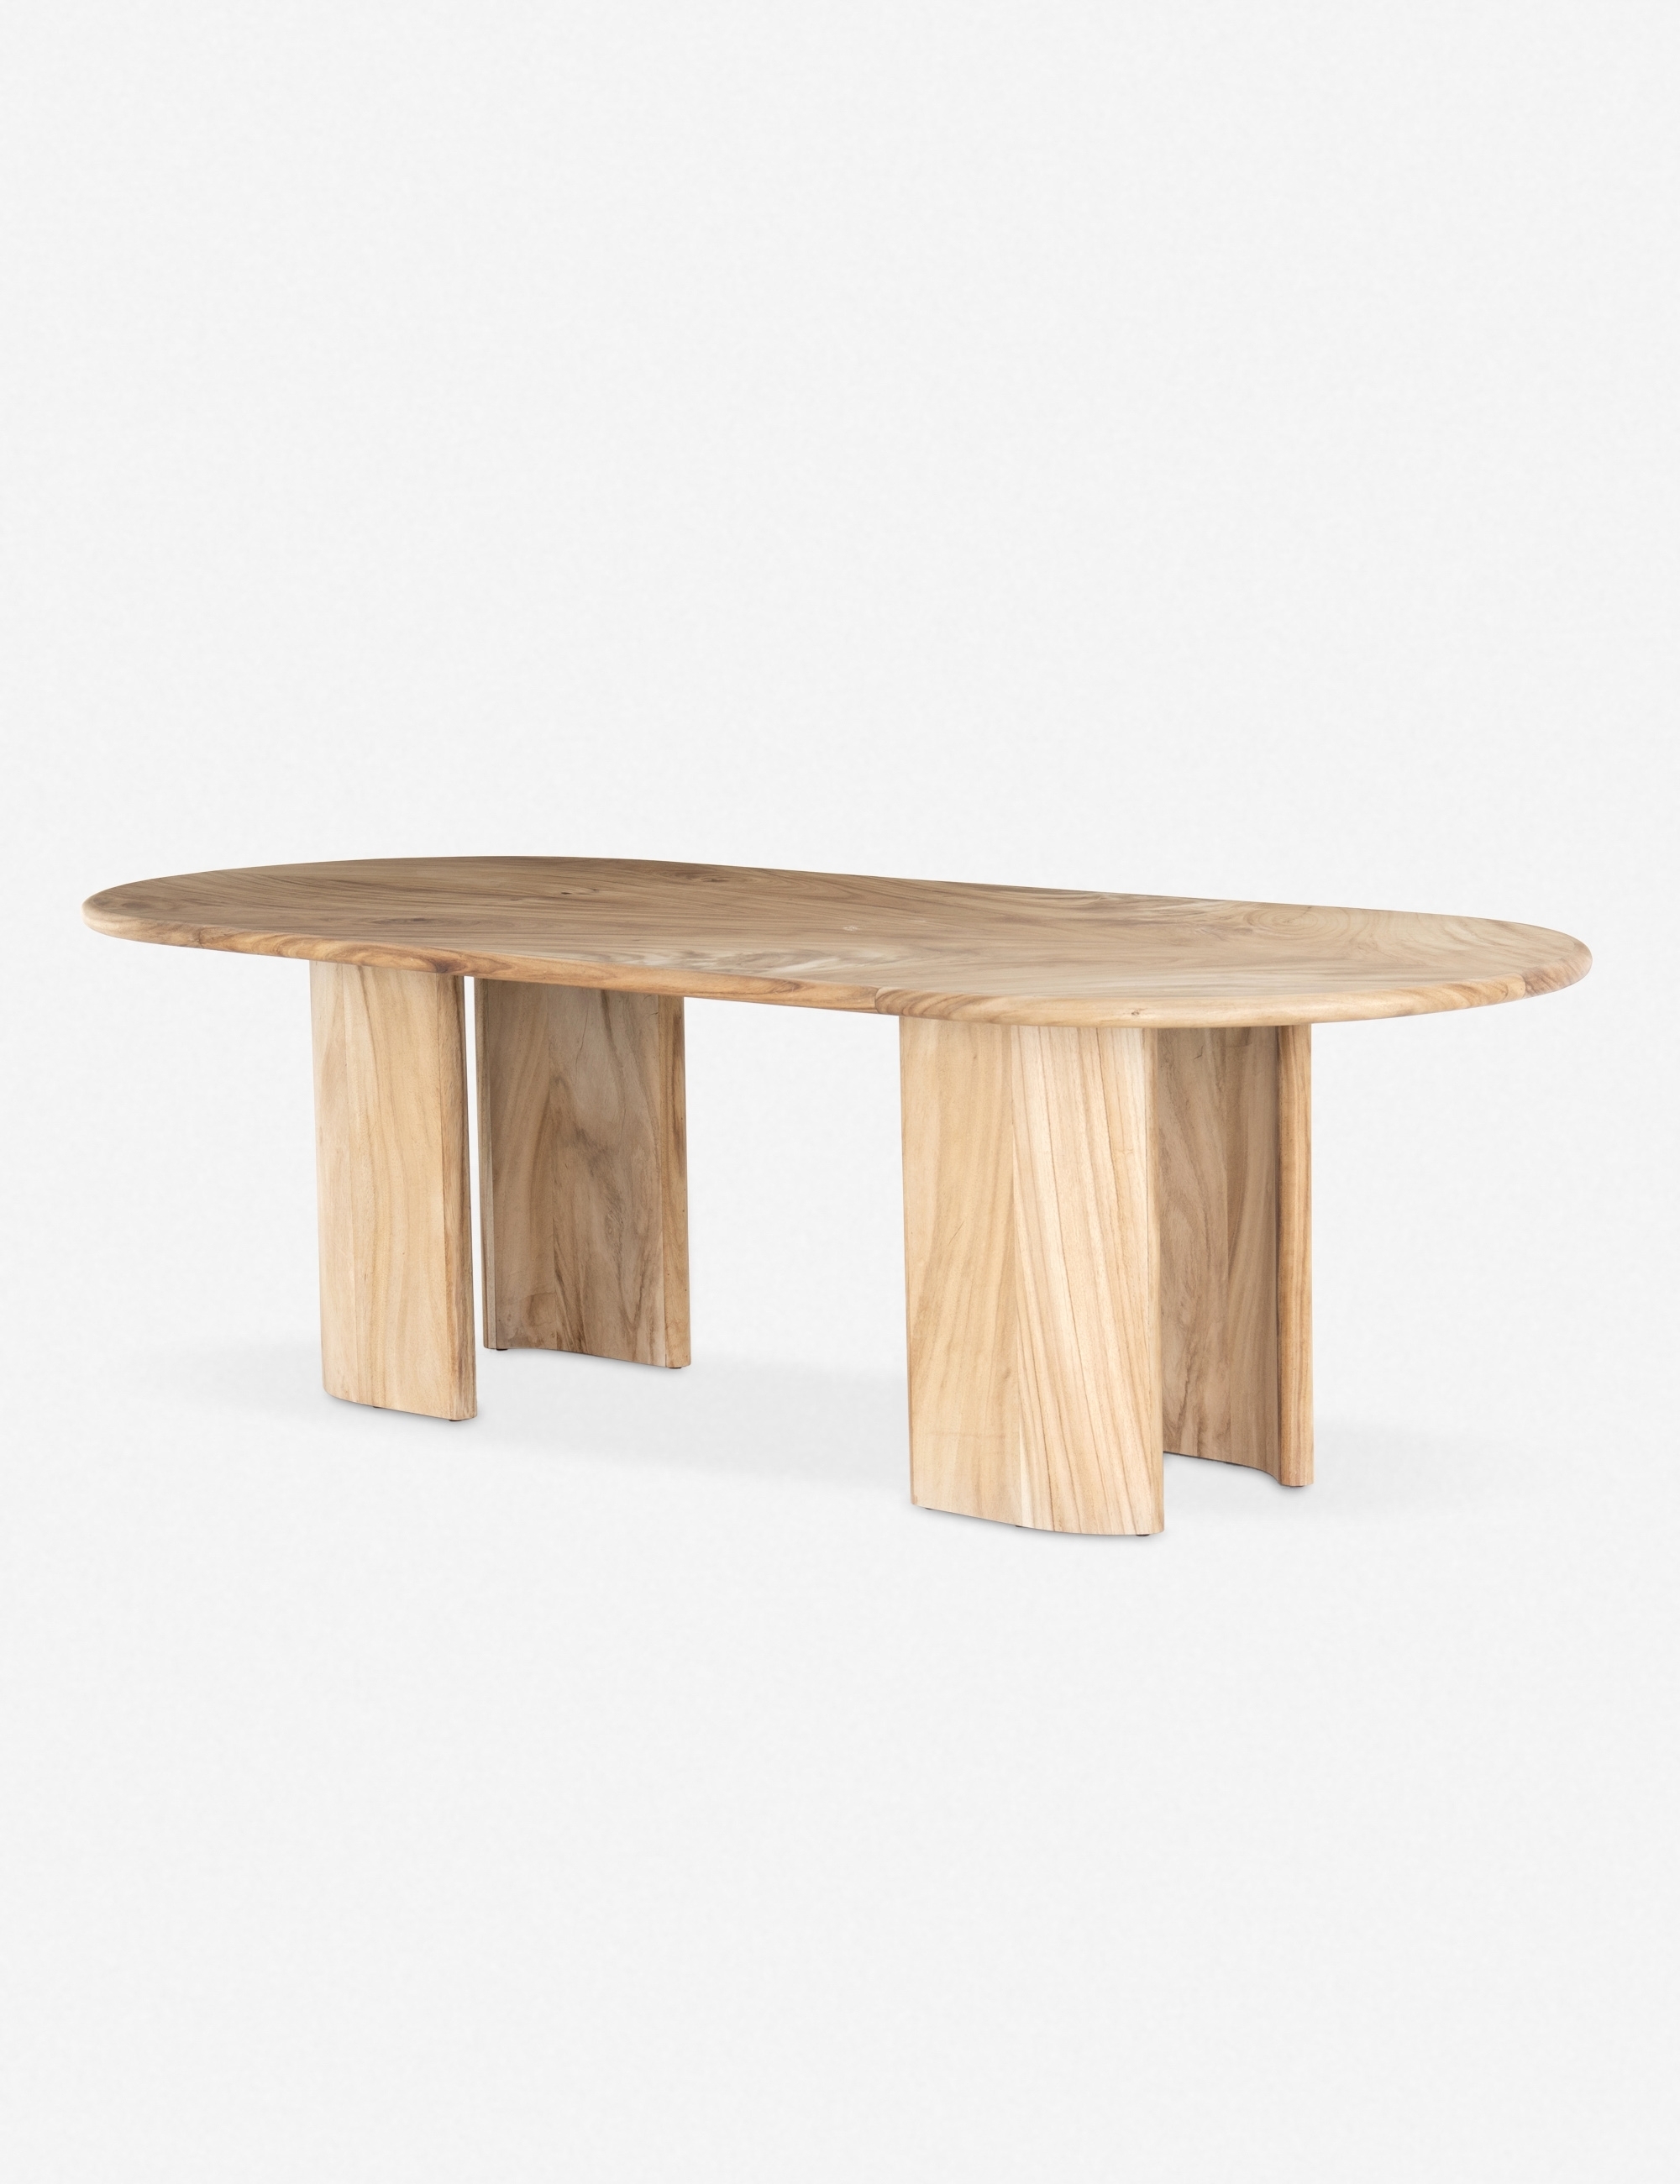 Nausica Oval Dining Table - Image 1